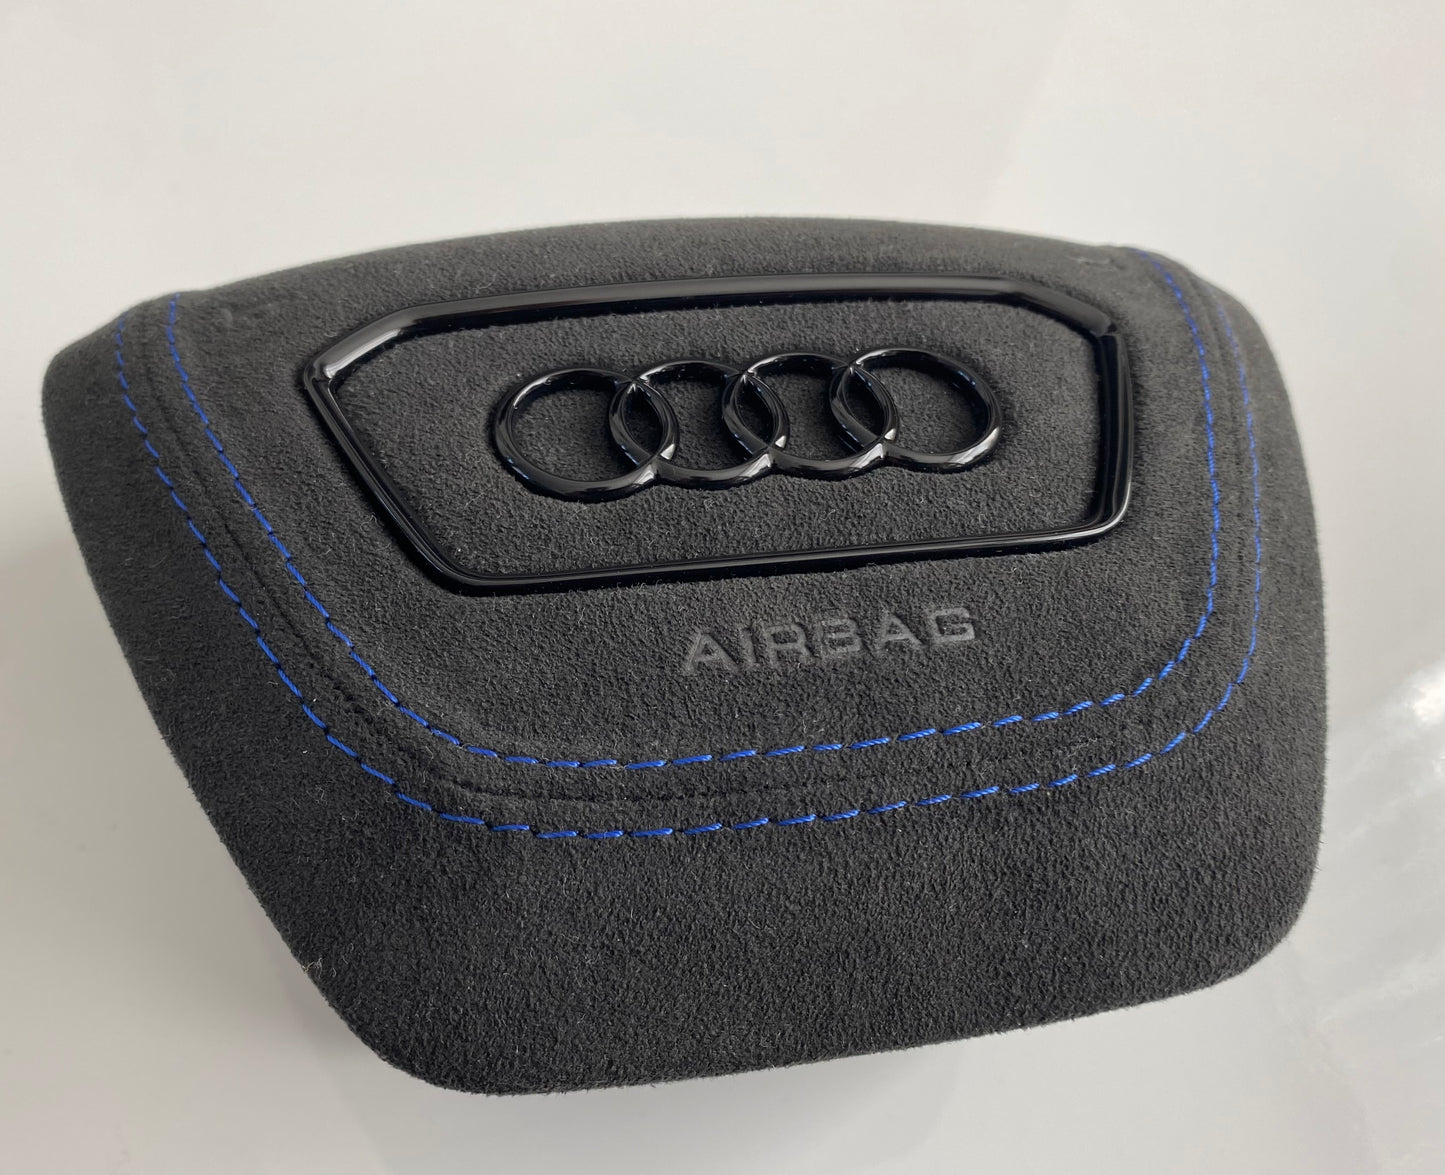 Airbag cover for Audi A6 A7 C8 - E-tron